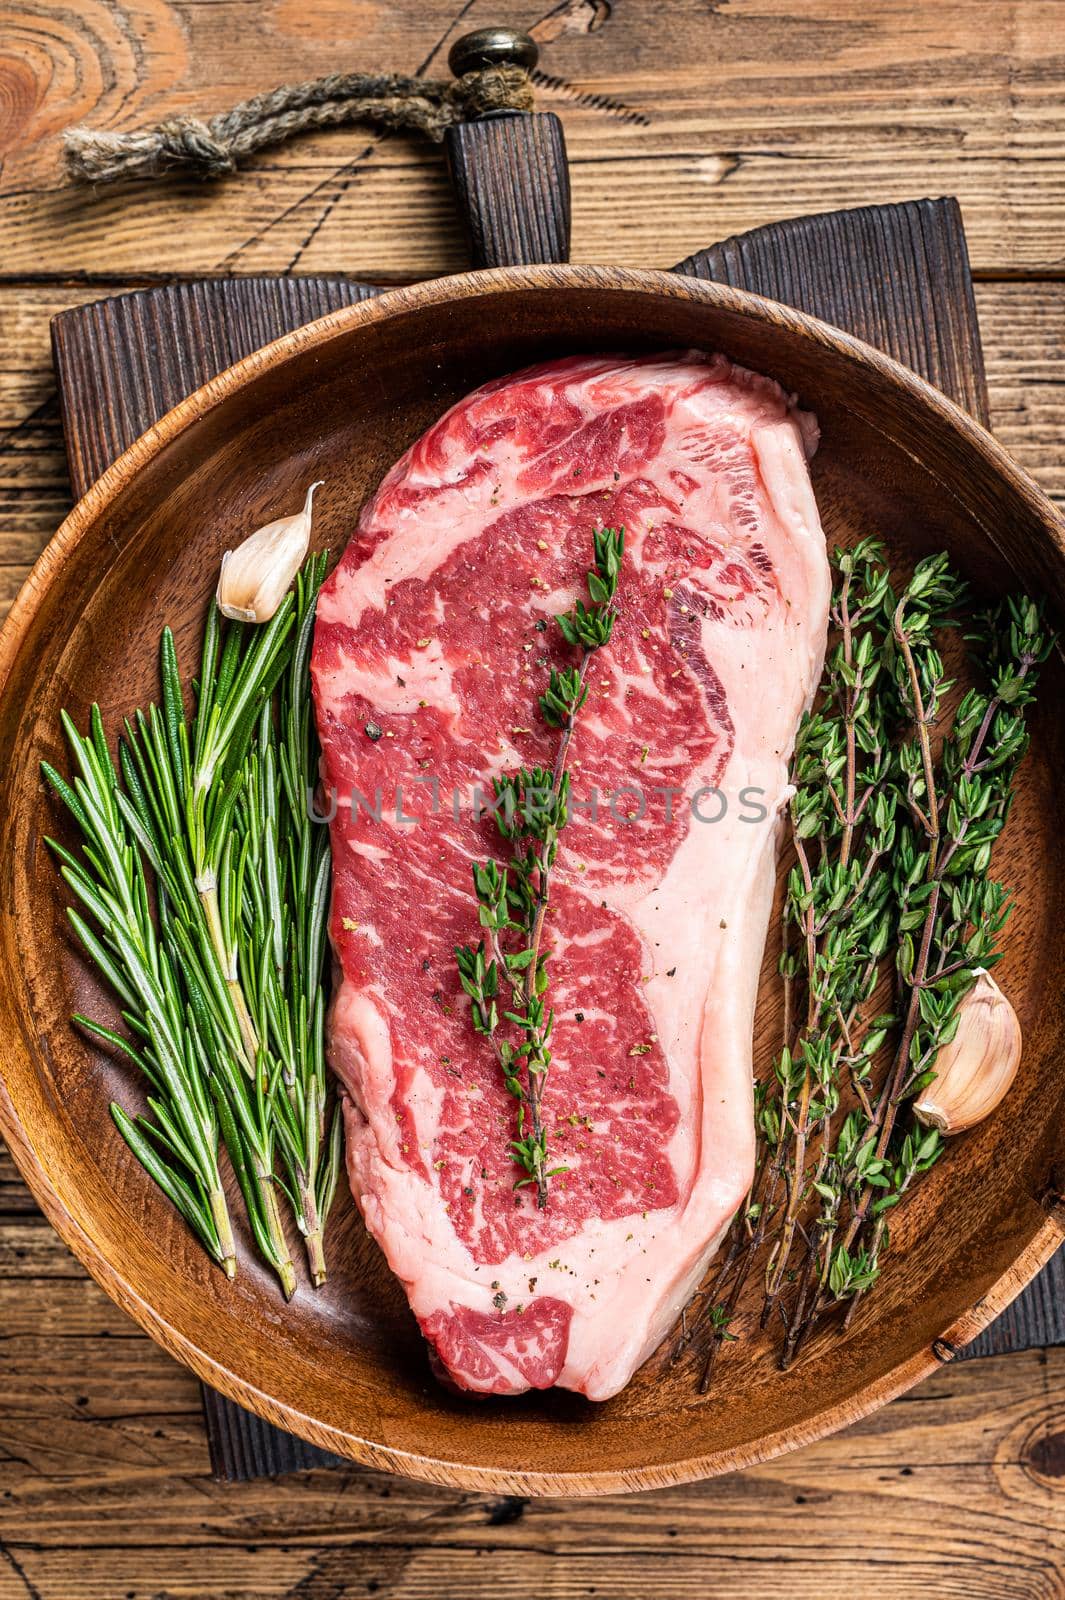 Fresh new york strip beef meat steak or striploin in a wooden plate with herbs. wooden background. Top view by Composter